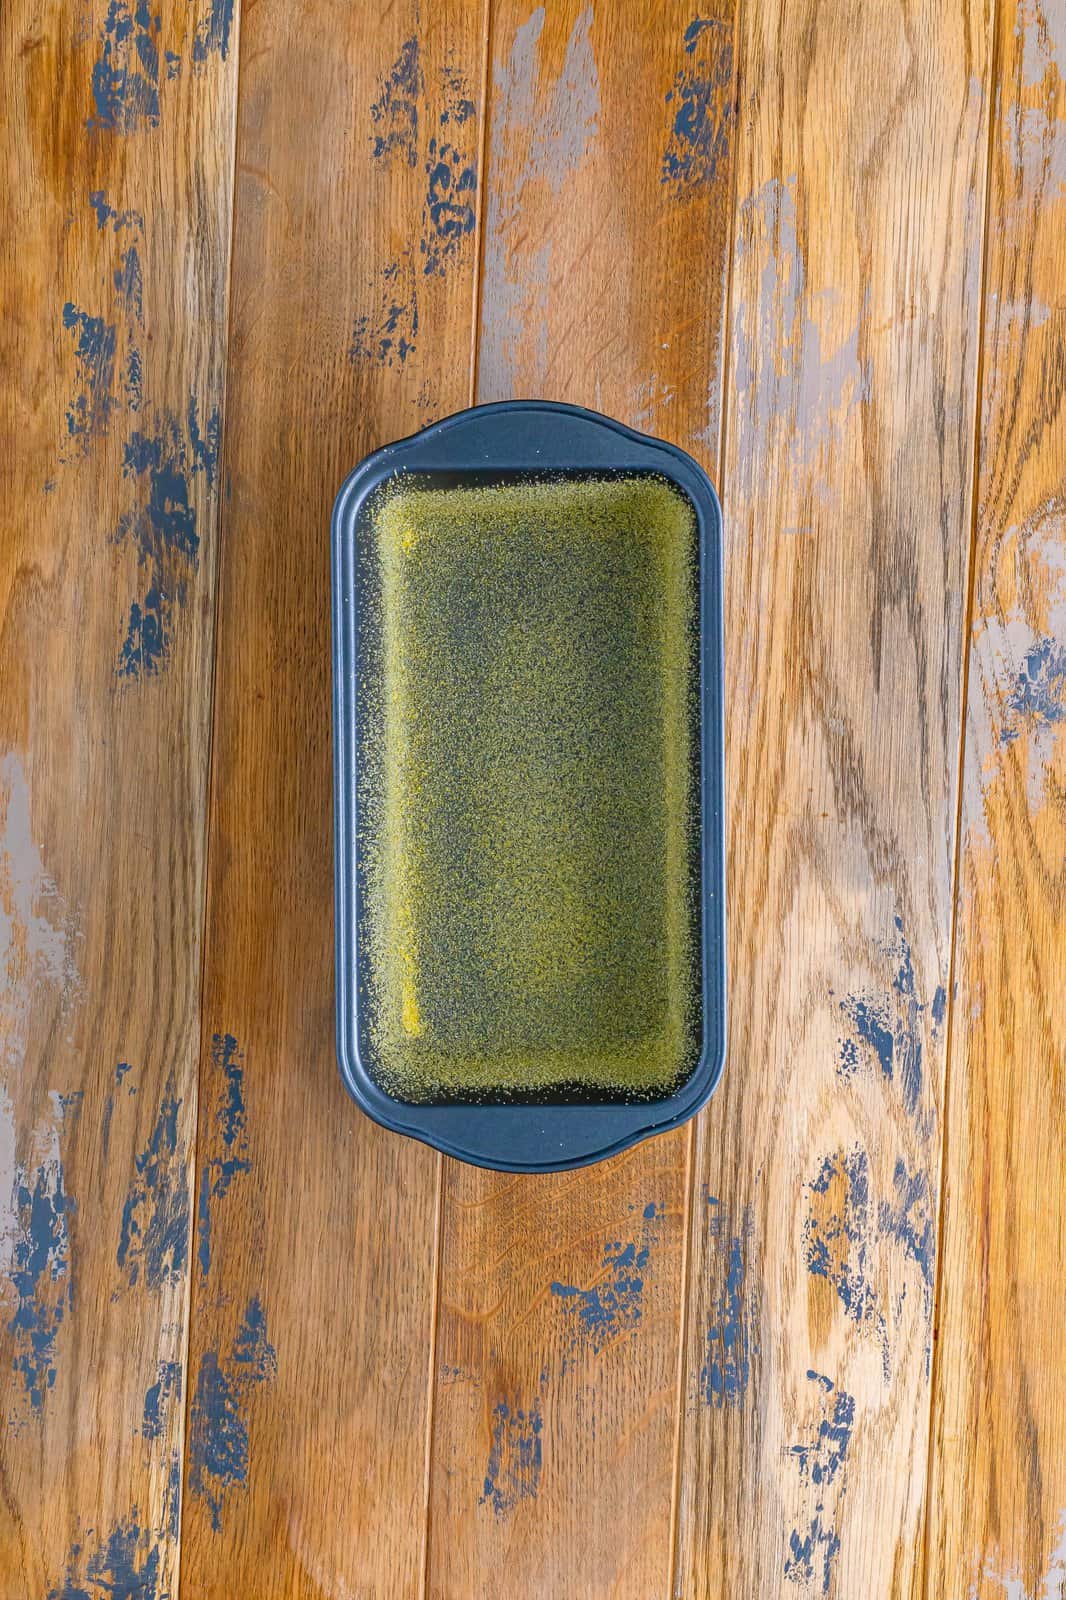 cornmeal in the bottom of a metal loaf pan.